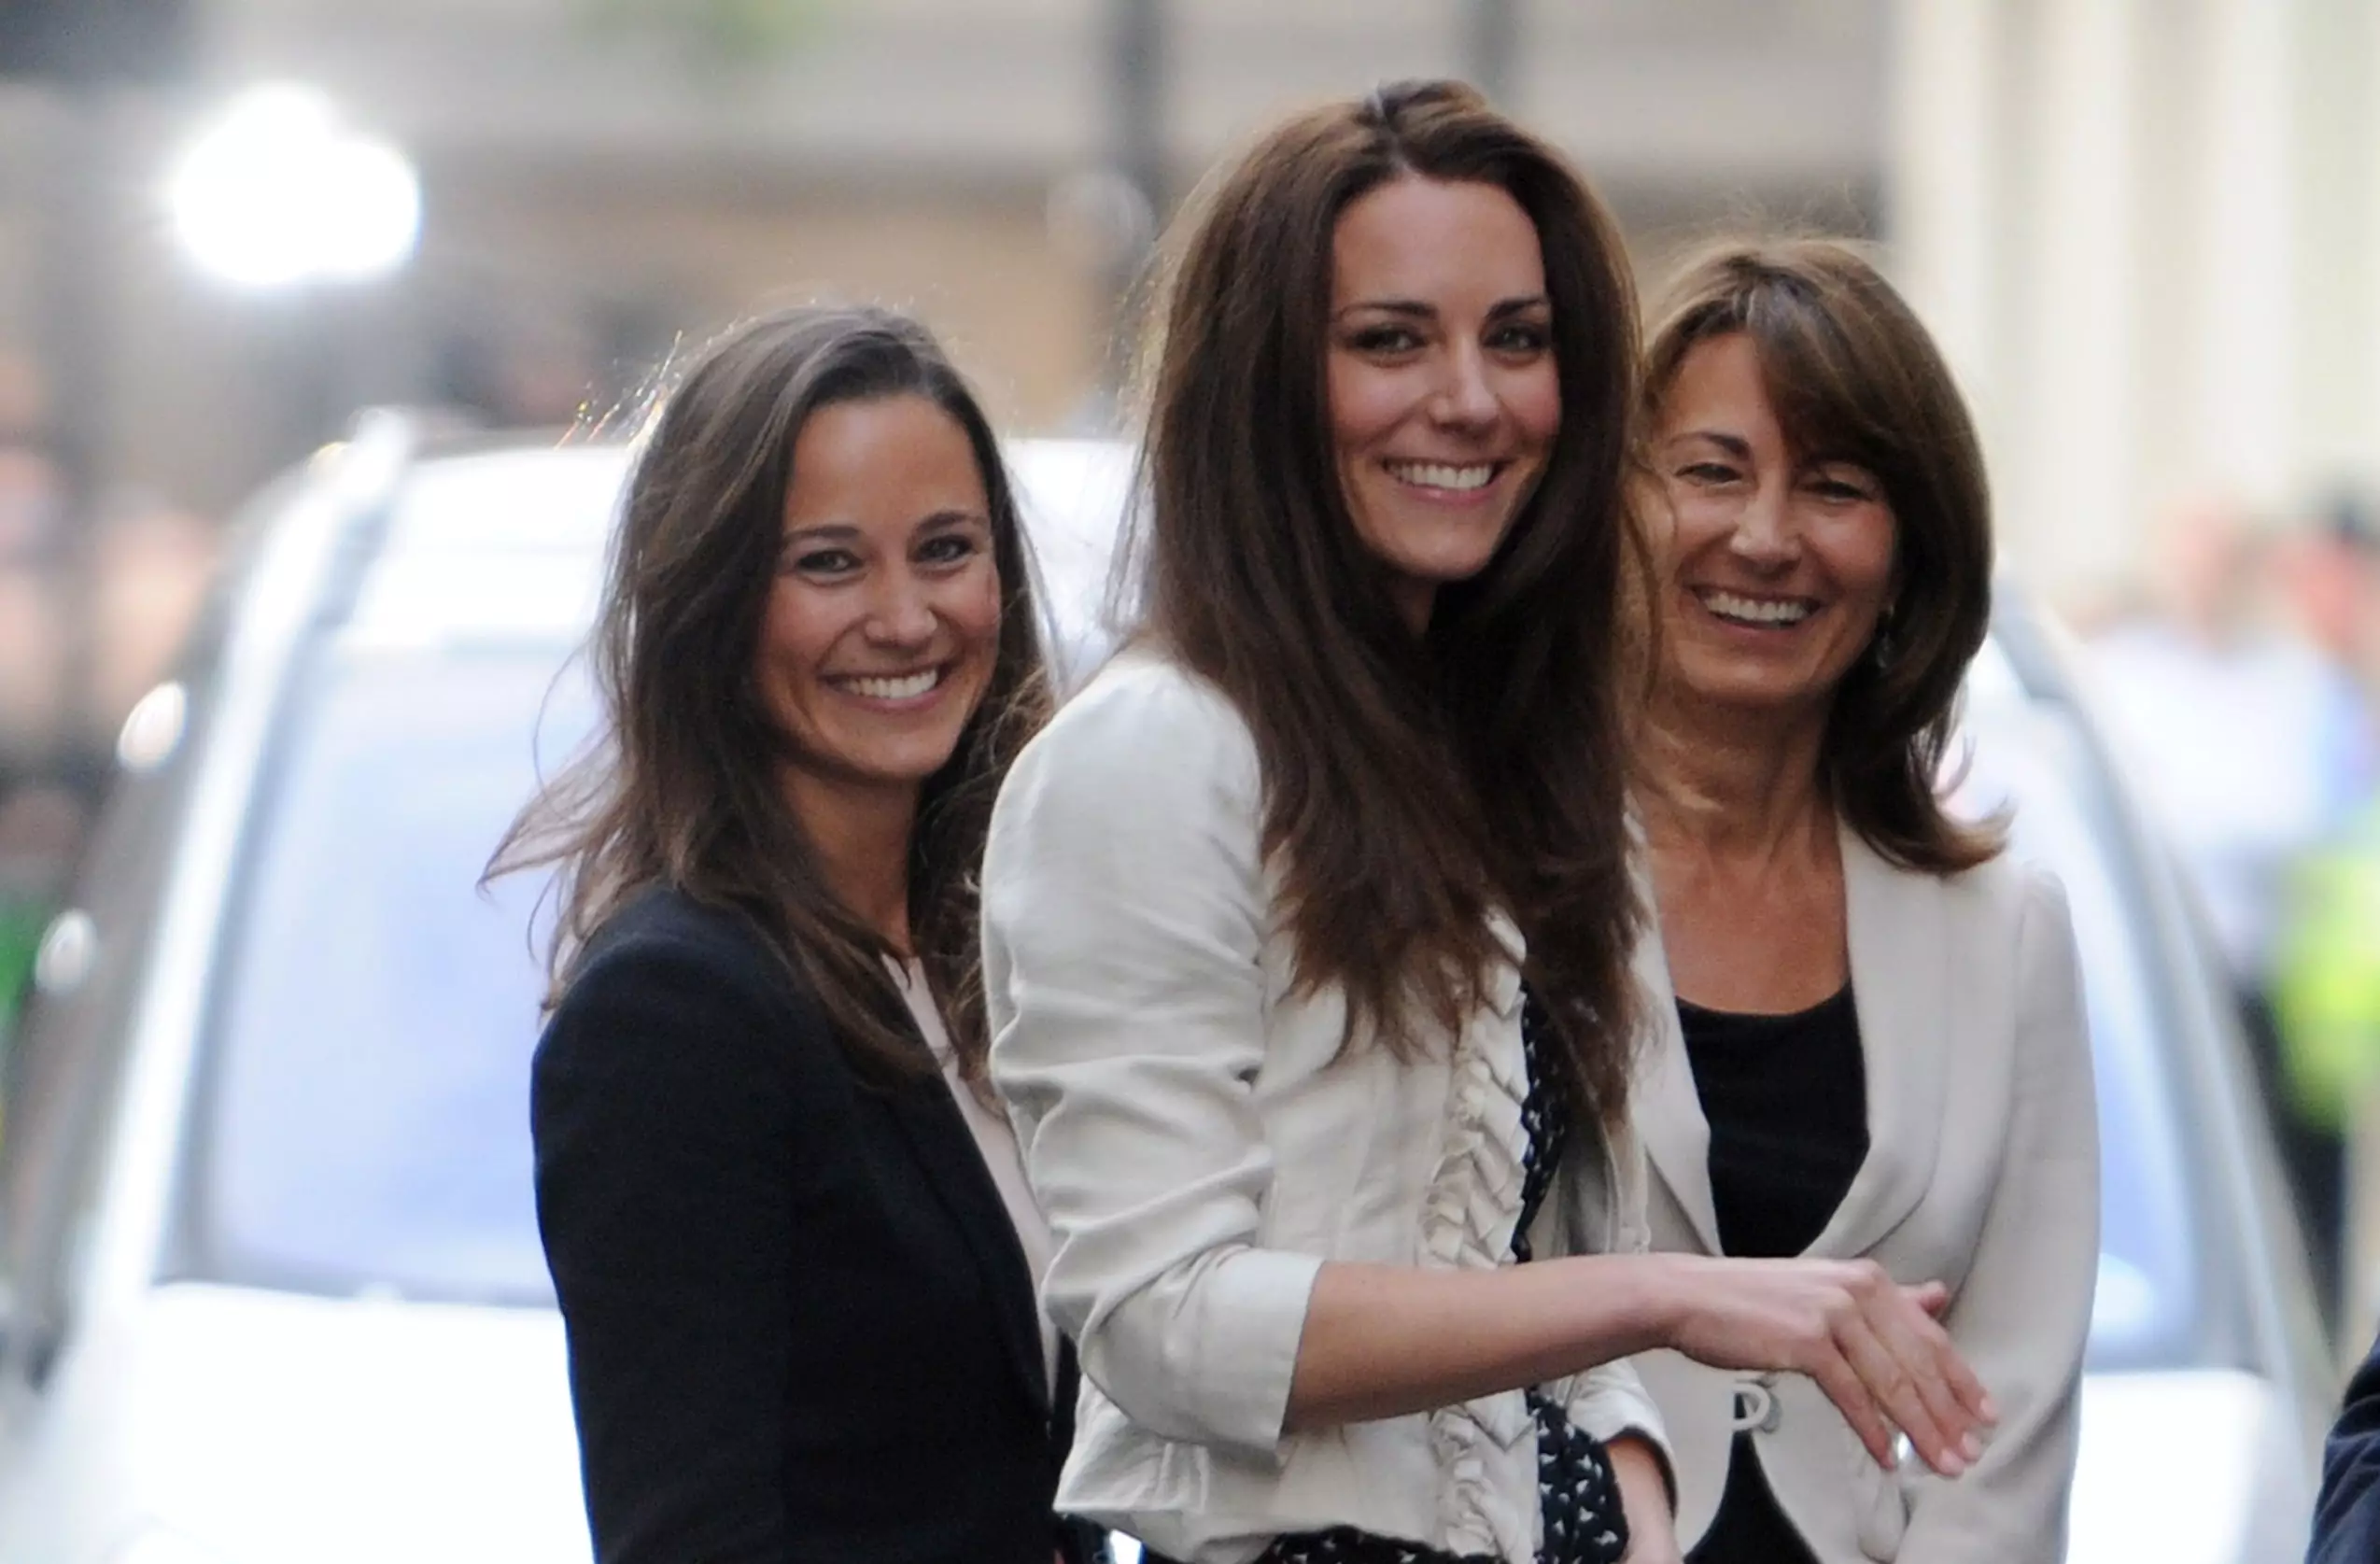 Carole Middleton's favourite music genre happens to be house (